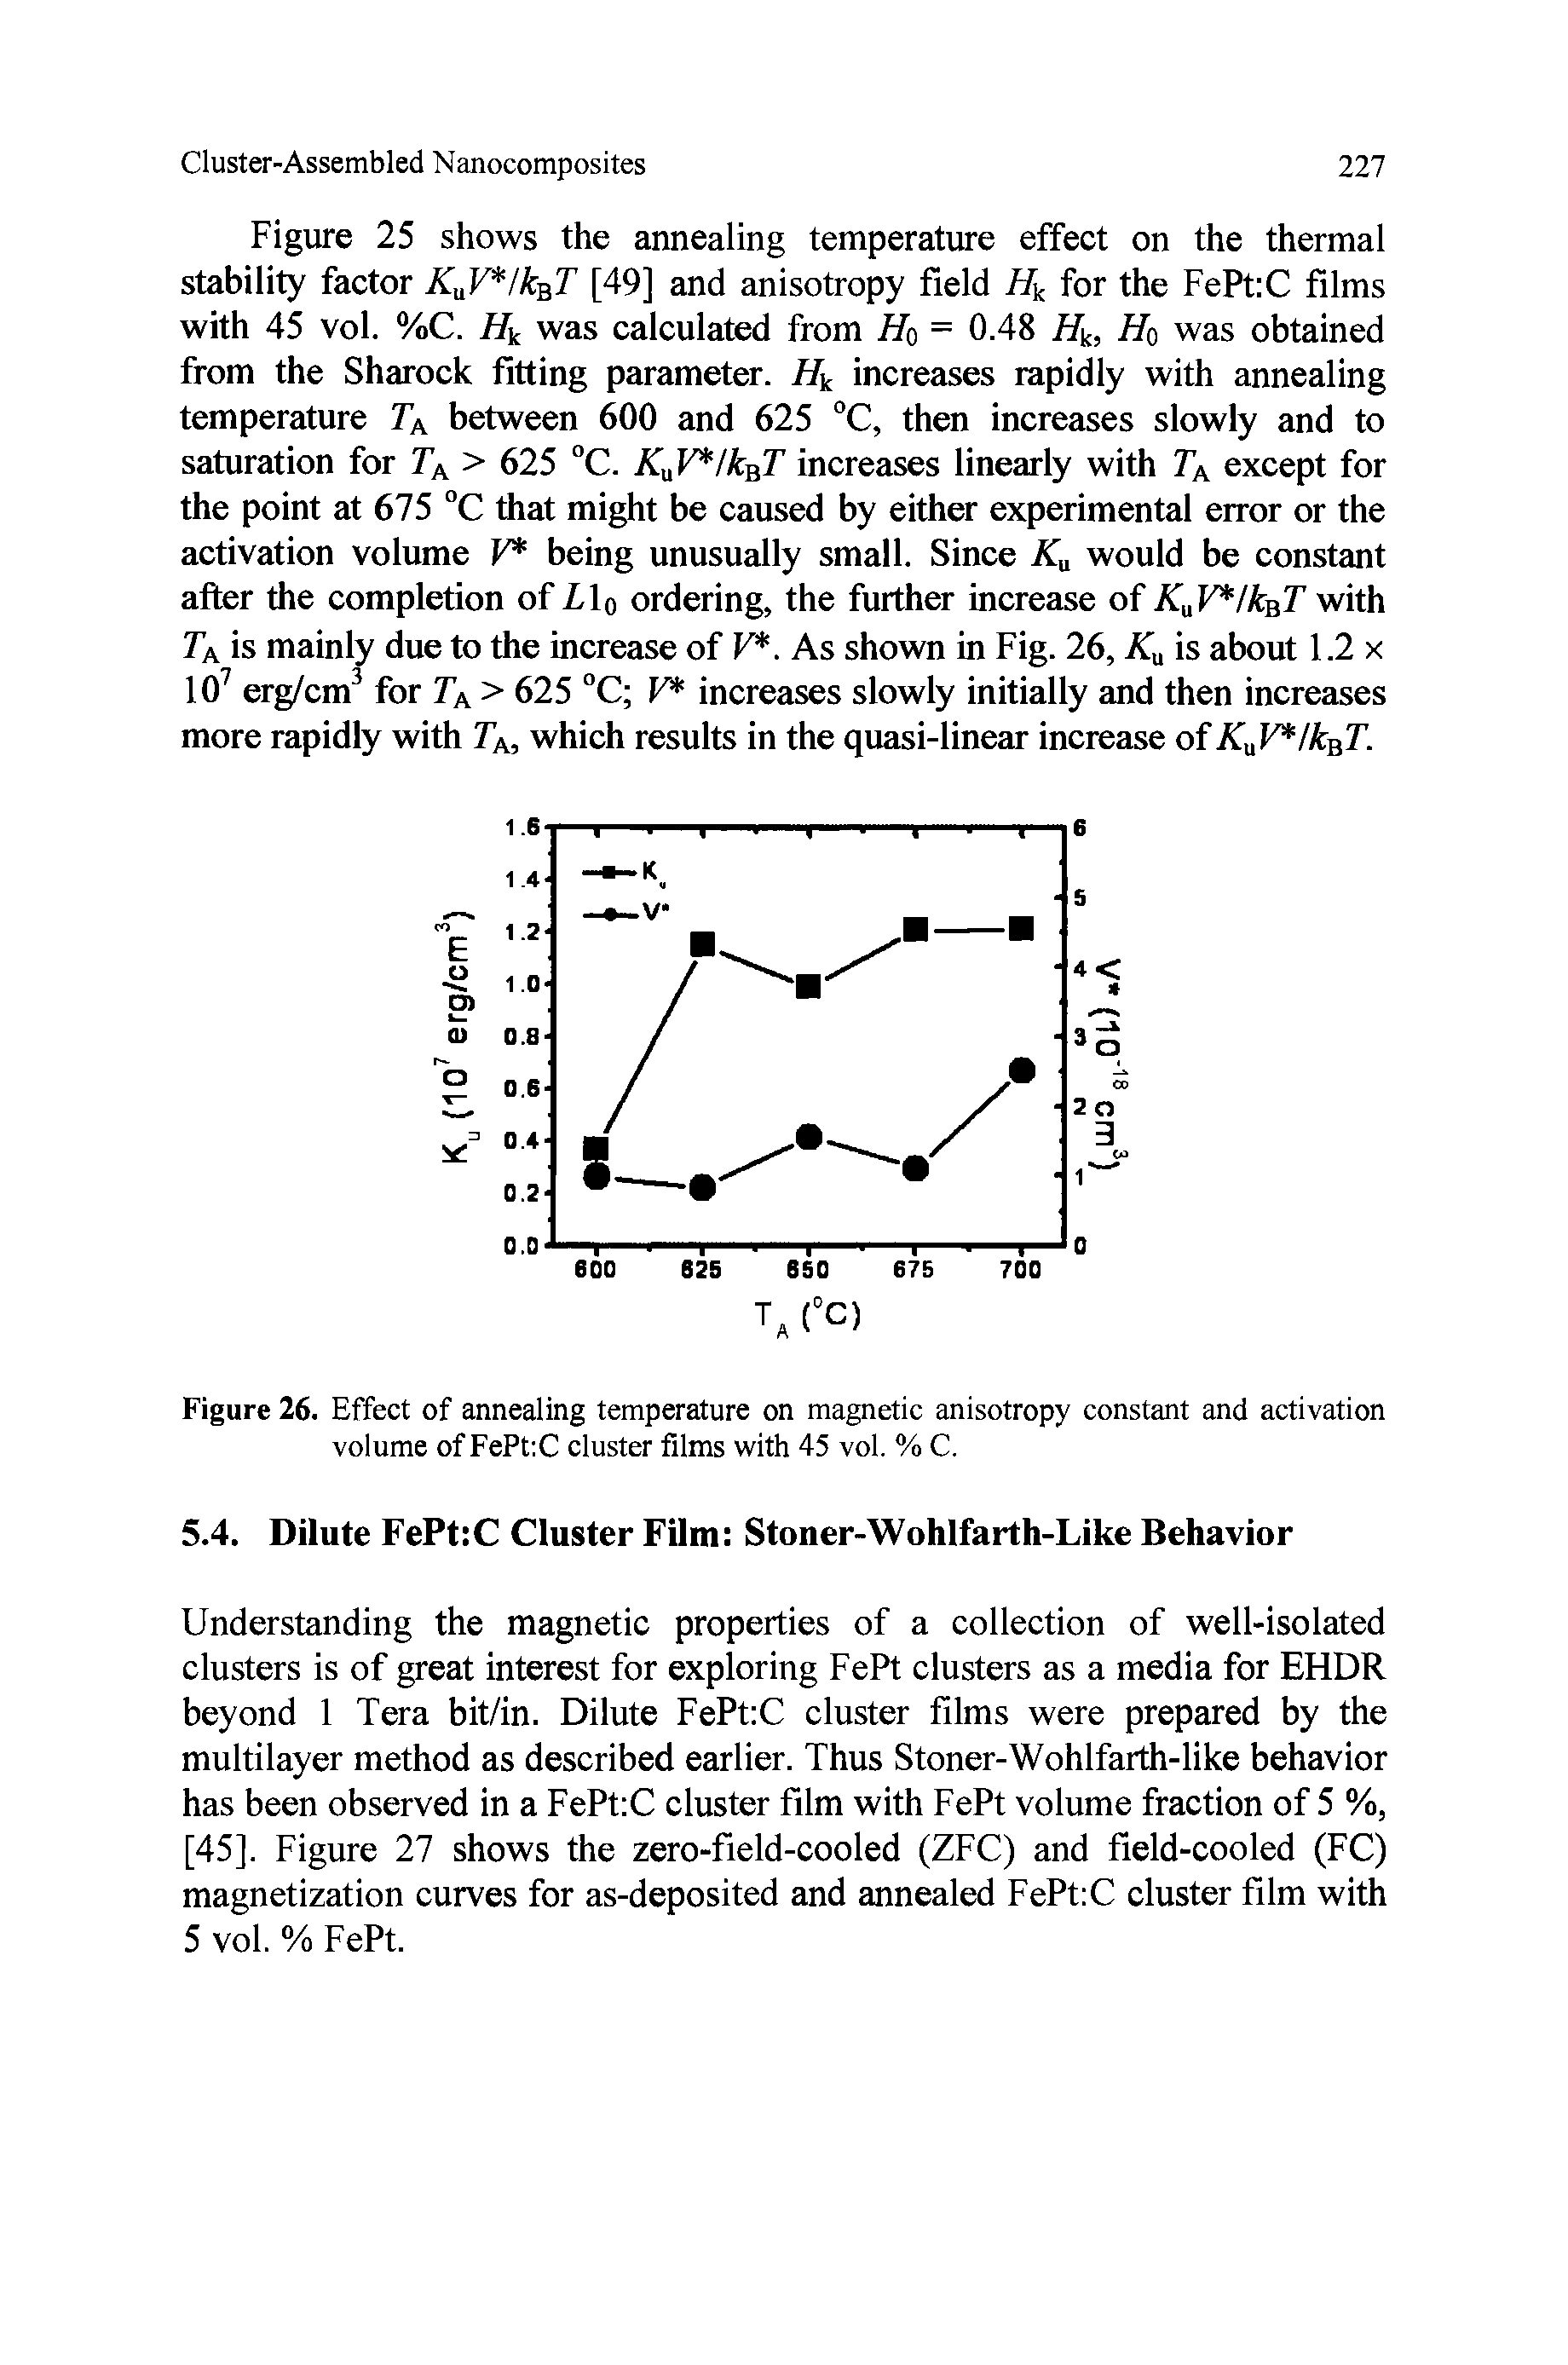 Figure 26. Effect of annealing temperature on magnetic anisotropy constant and activation volume of FePt C cluster films with 45 vol. % C.